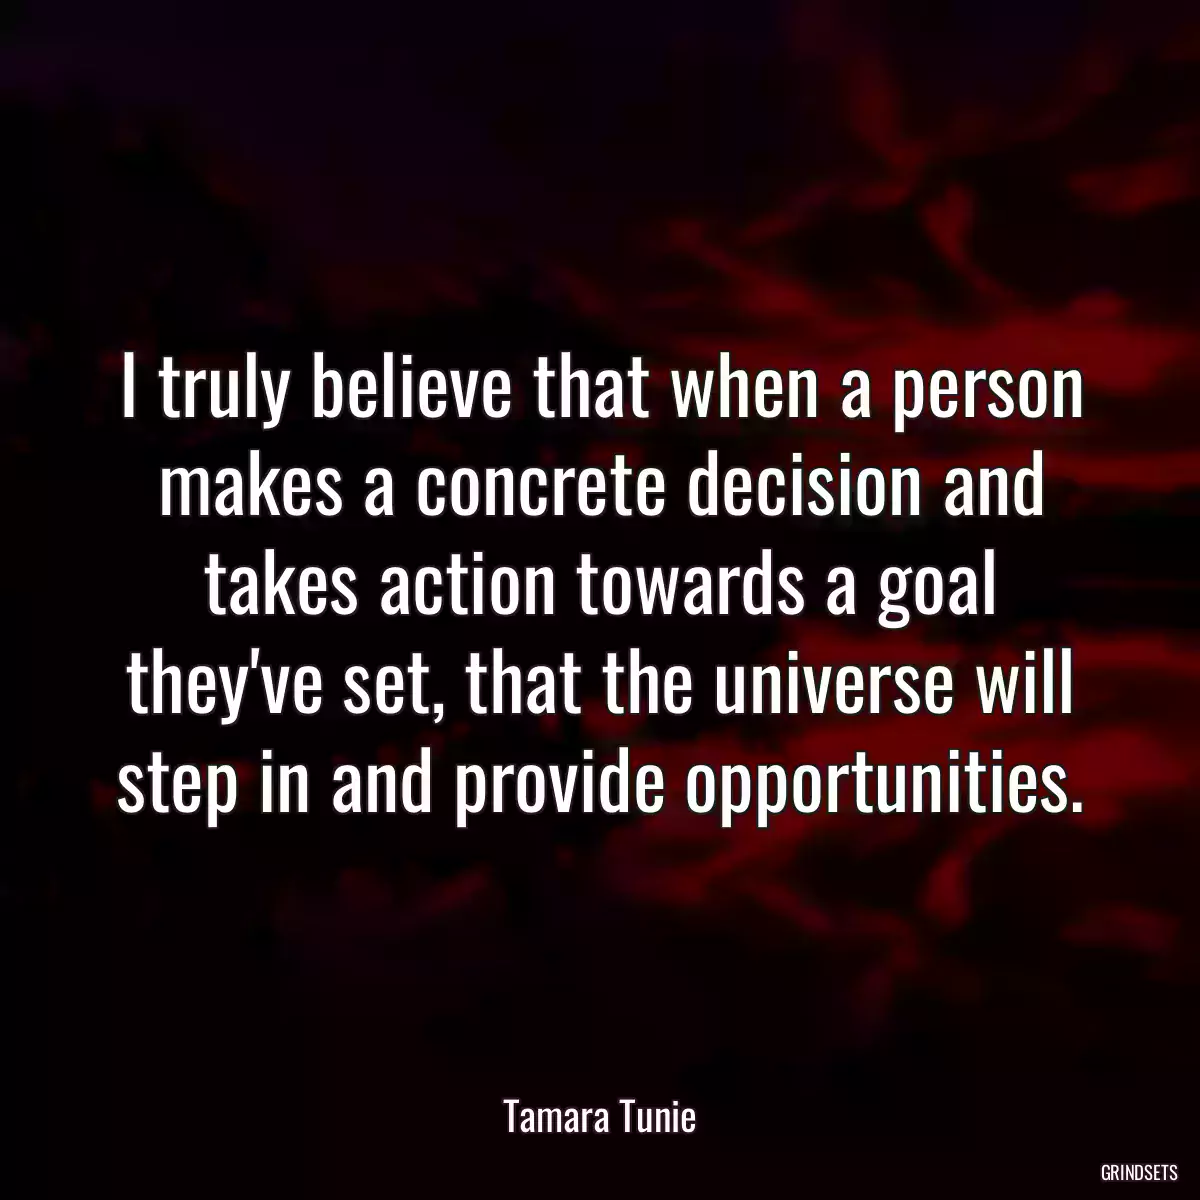 I truly believe that when a person makes a concrete decision and takes action towards a goal they\'ve set, that the universe will step in and provide opportunities.